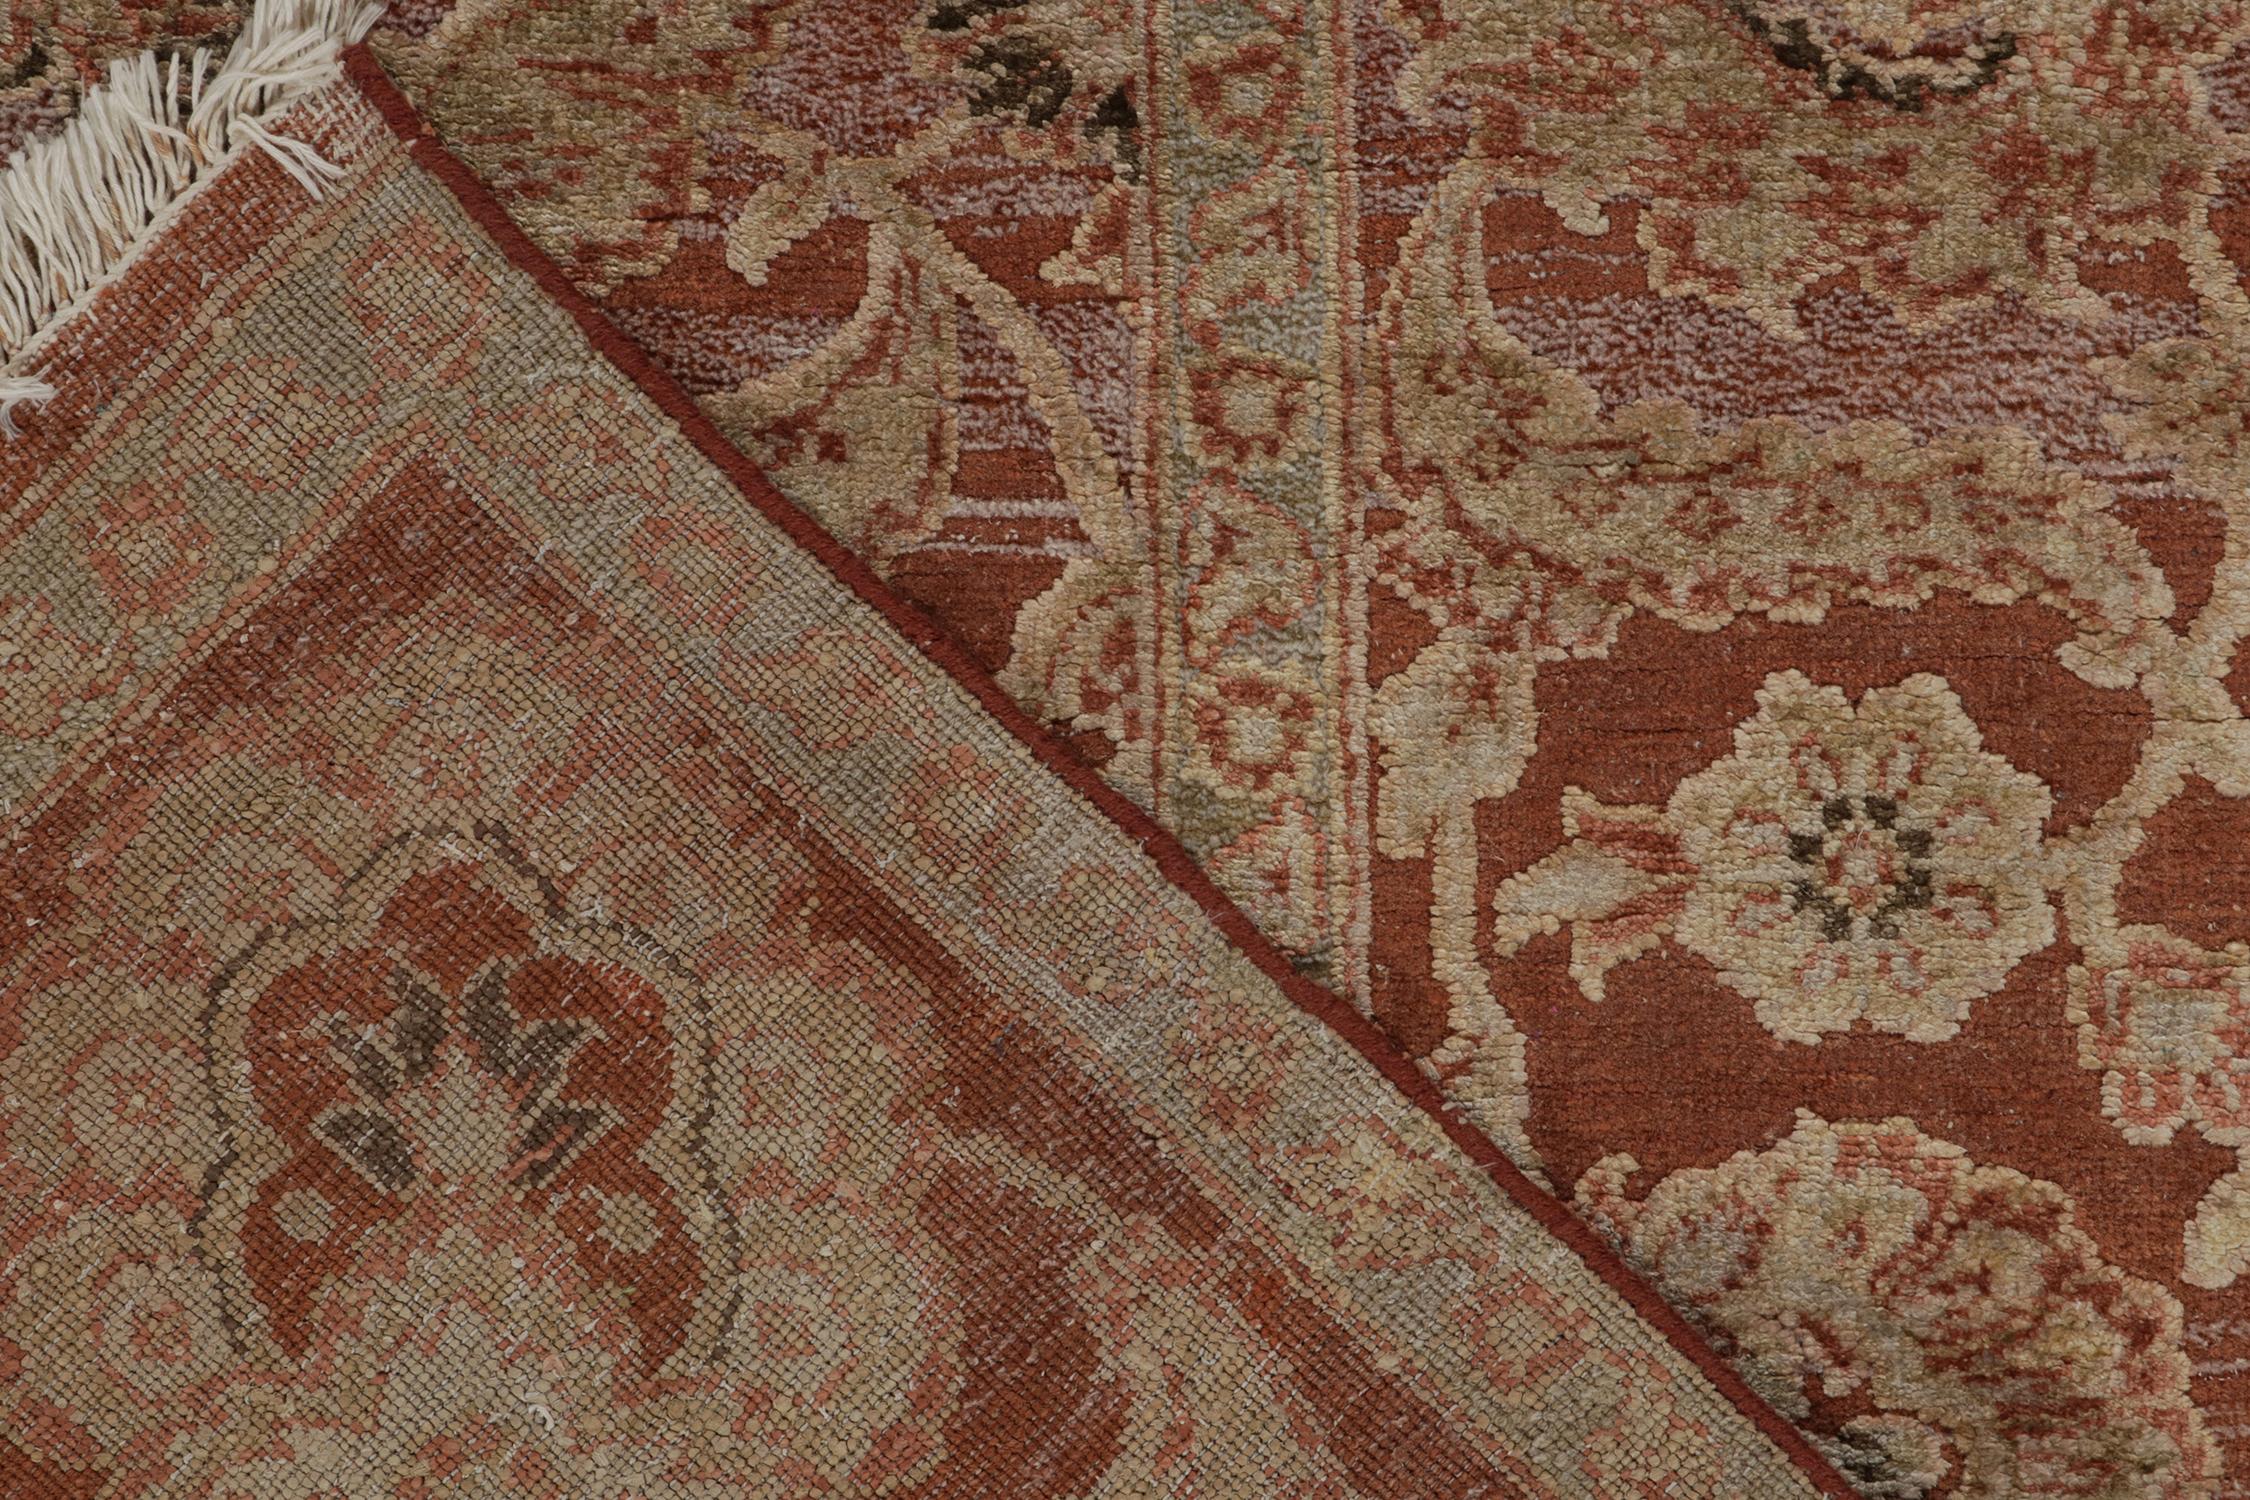 Contemporary Rug & Kilim’s Tabriz Style Rug in Rust Red, Pink and Beige-Brown Floral Patterns For Sale